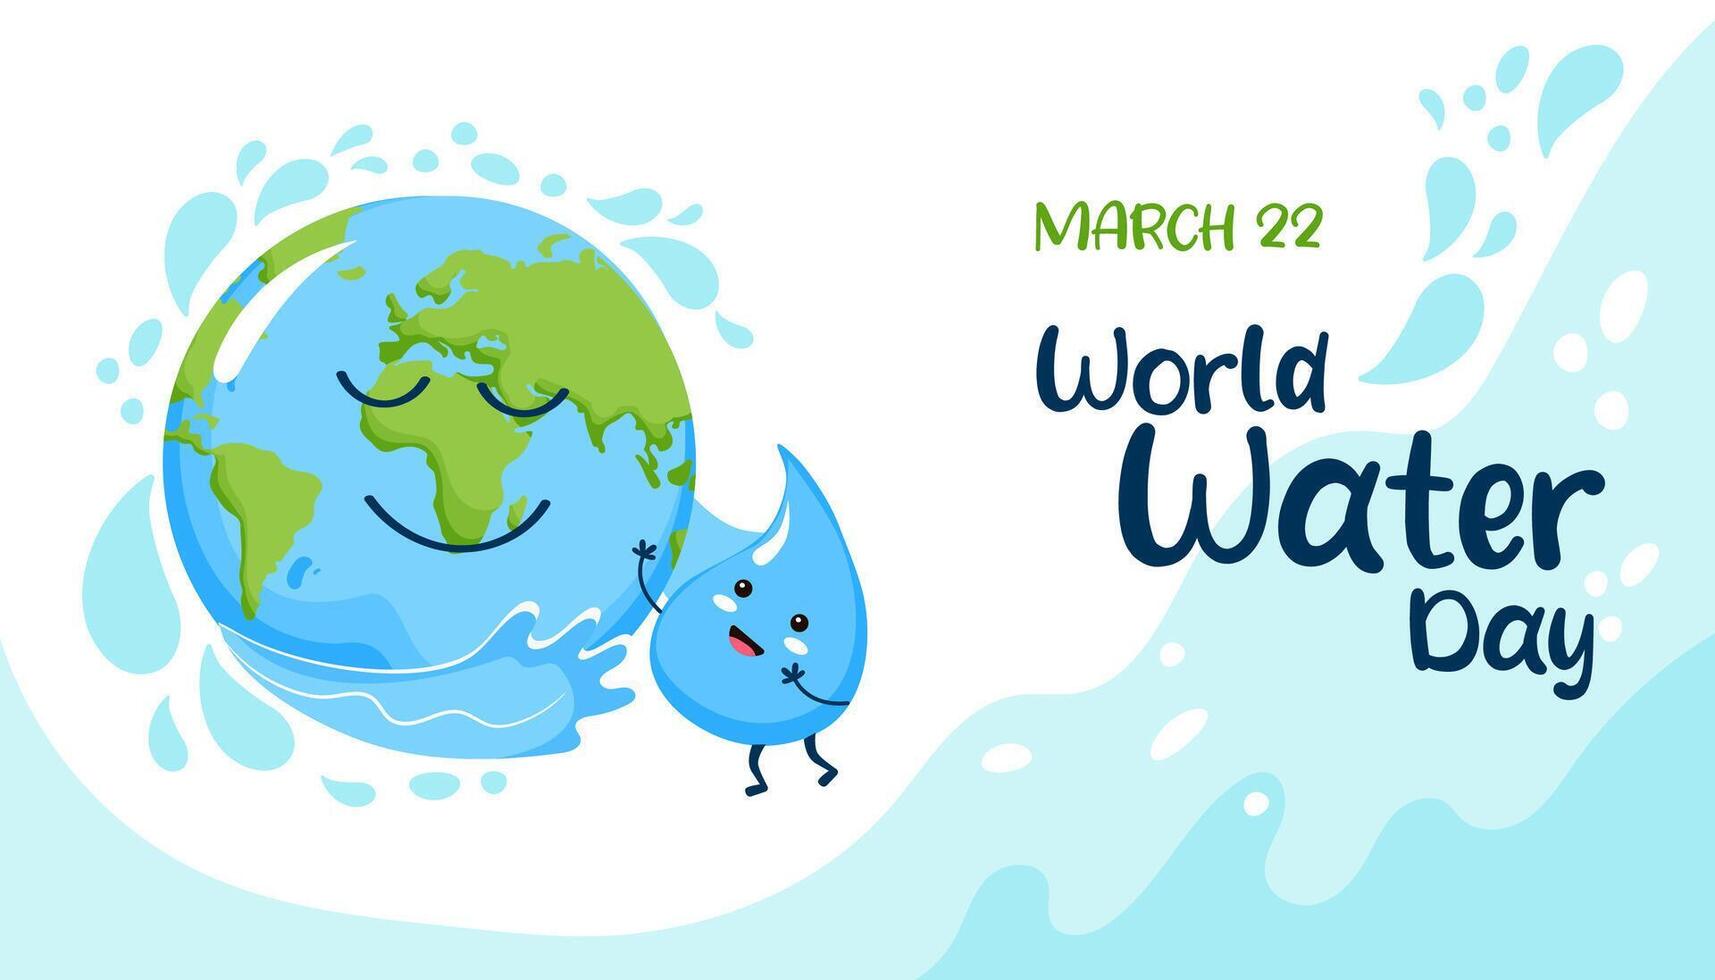 World Water Day banner template. Cute characters water drop and planet Earth embrace each other. Vector illustration.